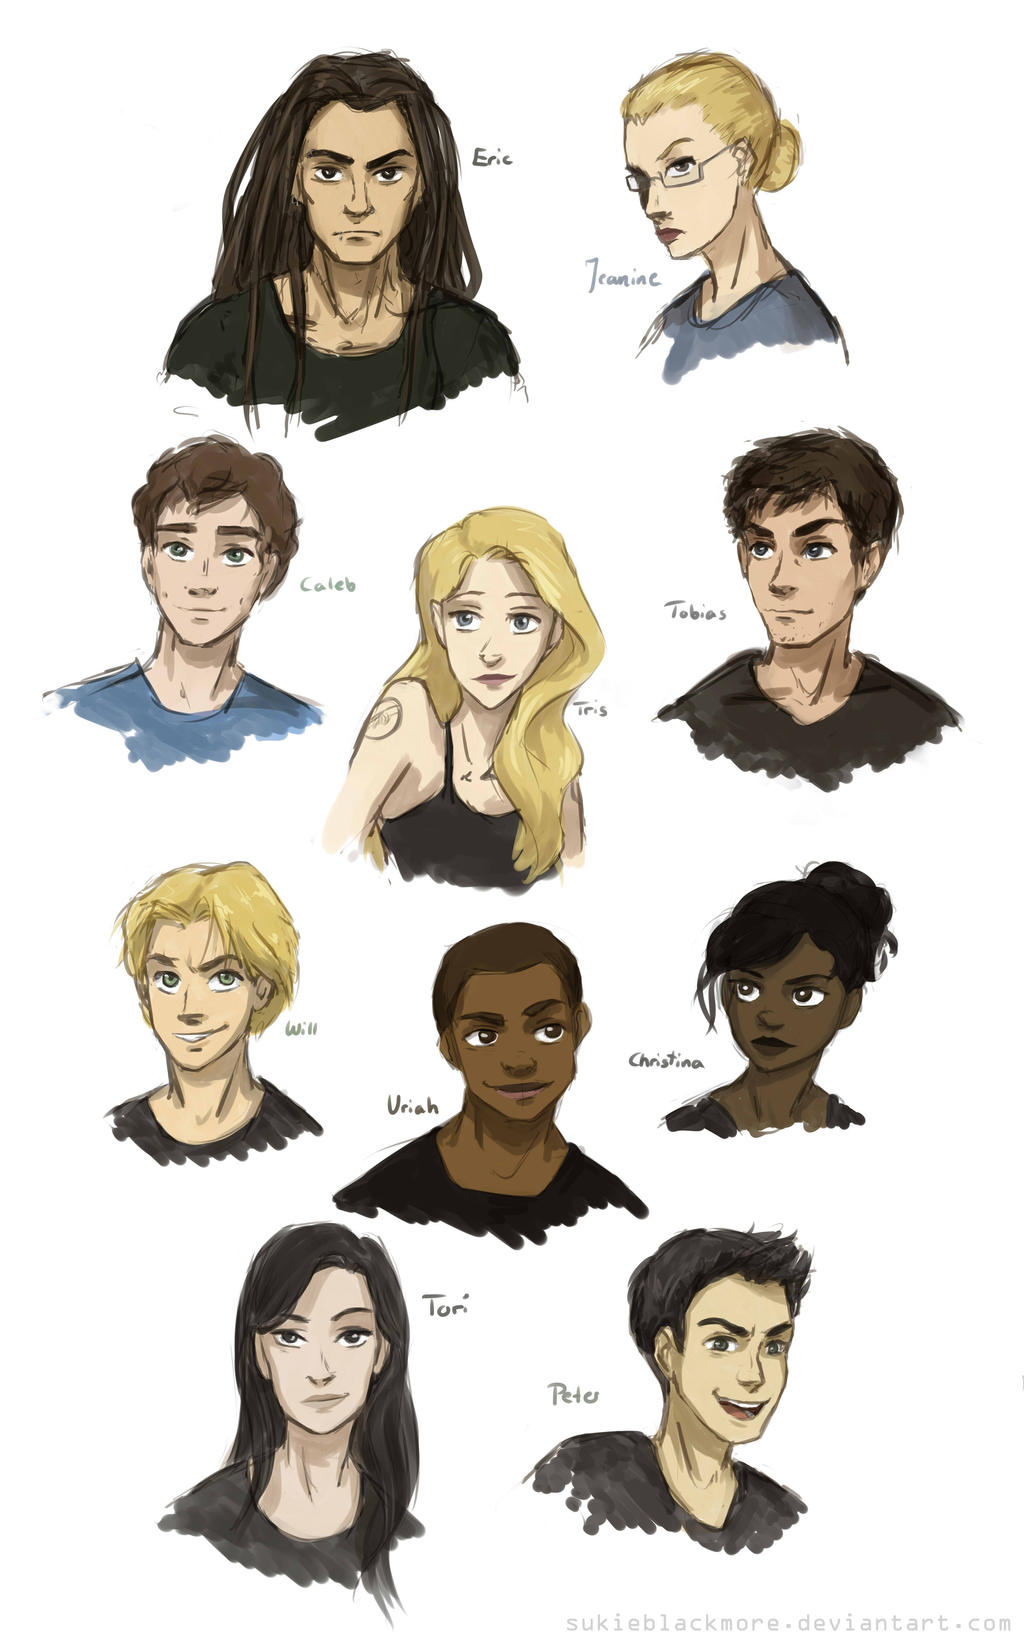 Characters of Divergent